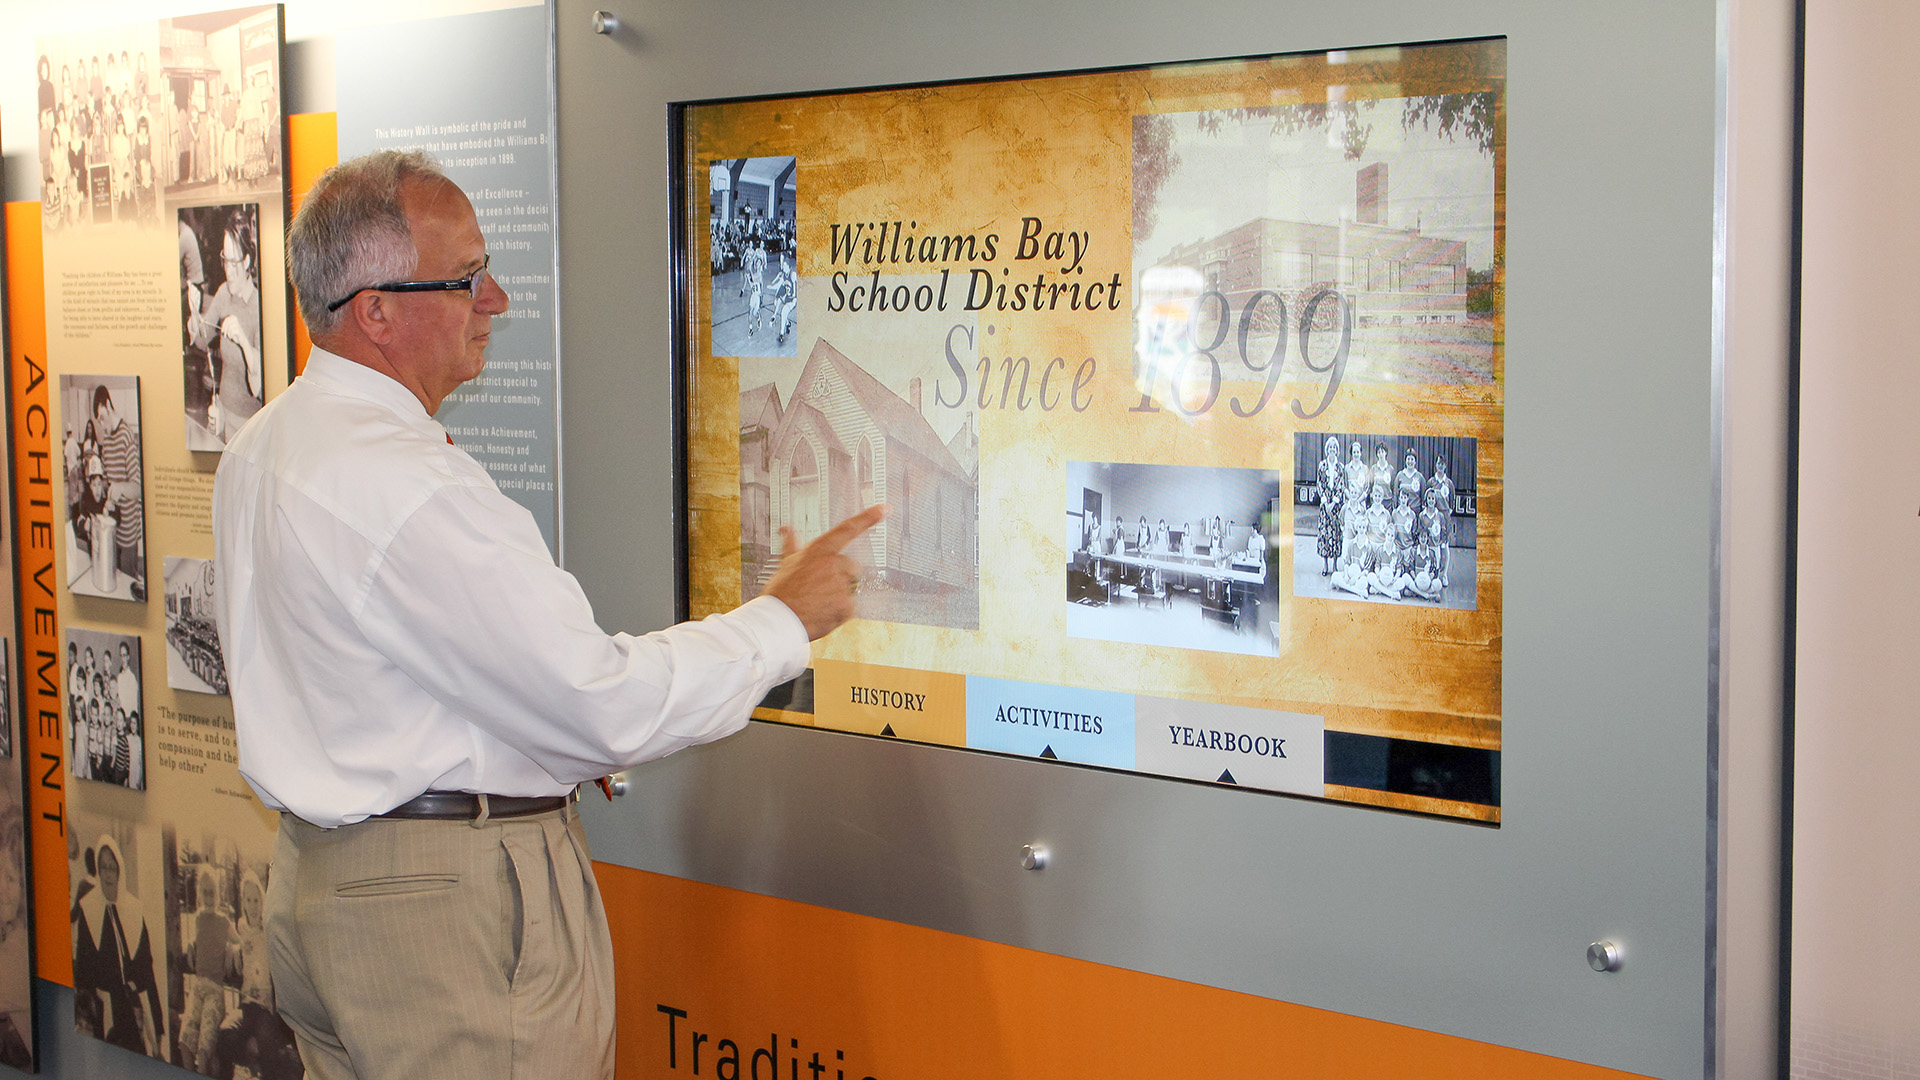 A display wall features history panels of the school in the blues and golds. A man standing at the wall is interacting with the school digital signage touchscreen display showing history and yearbook content.